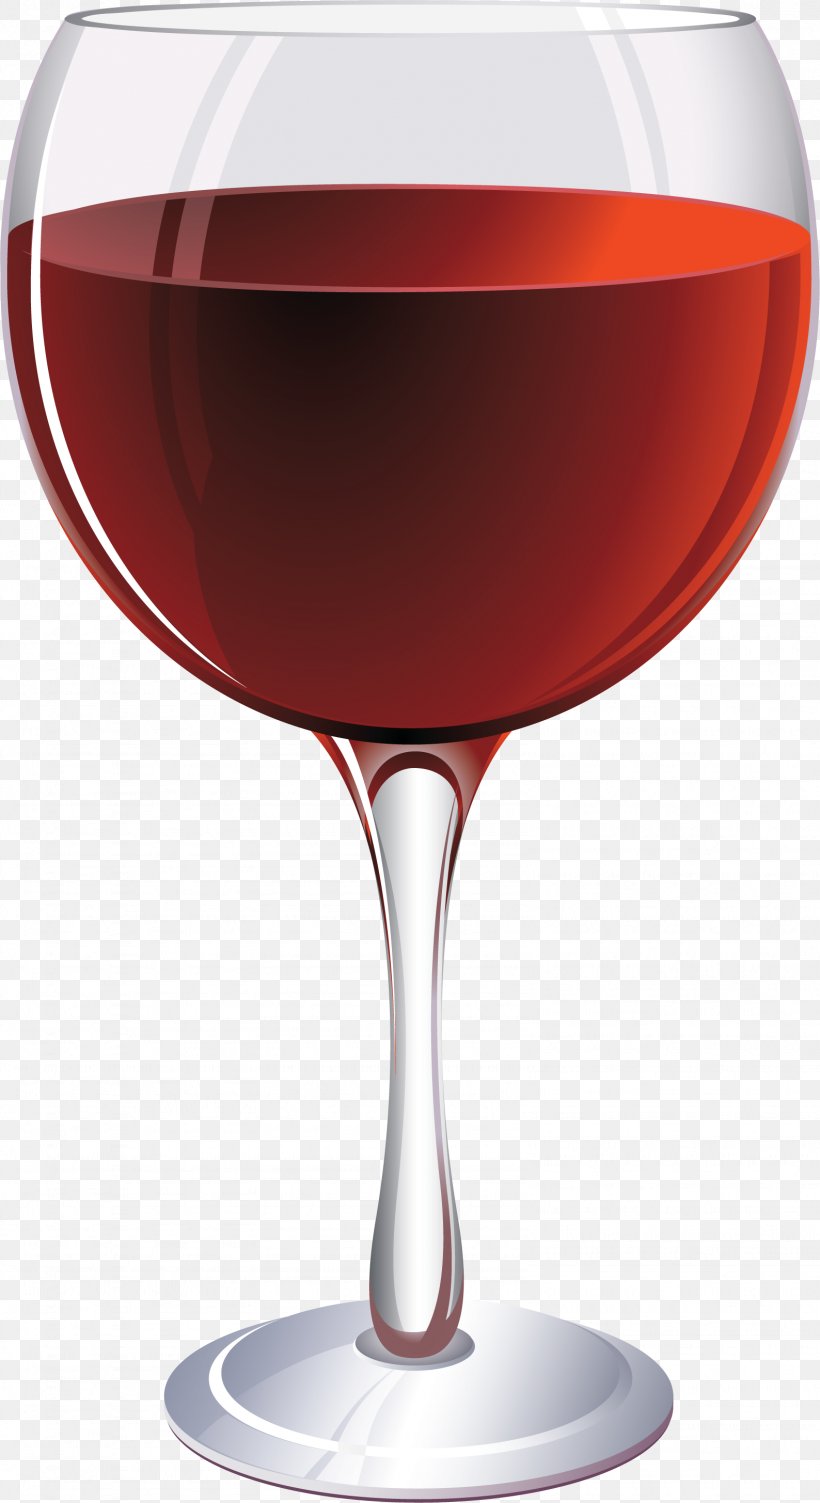 Red Wine Cocktail Champagne Clip Art, PNG, 1588x2912px, Wine, Bottle, Champagne, Champagne Glass, Champagne Stemware Download Free